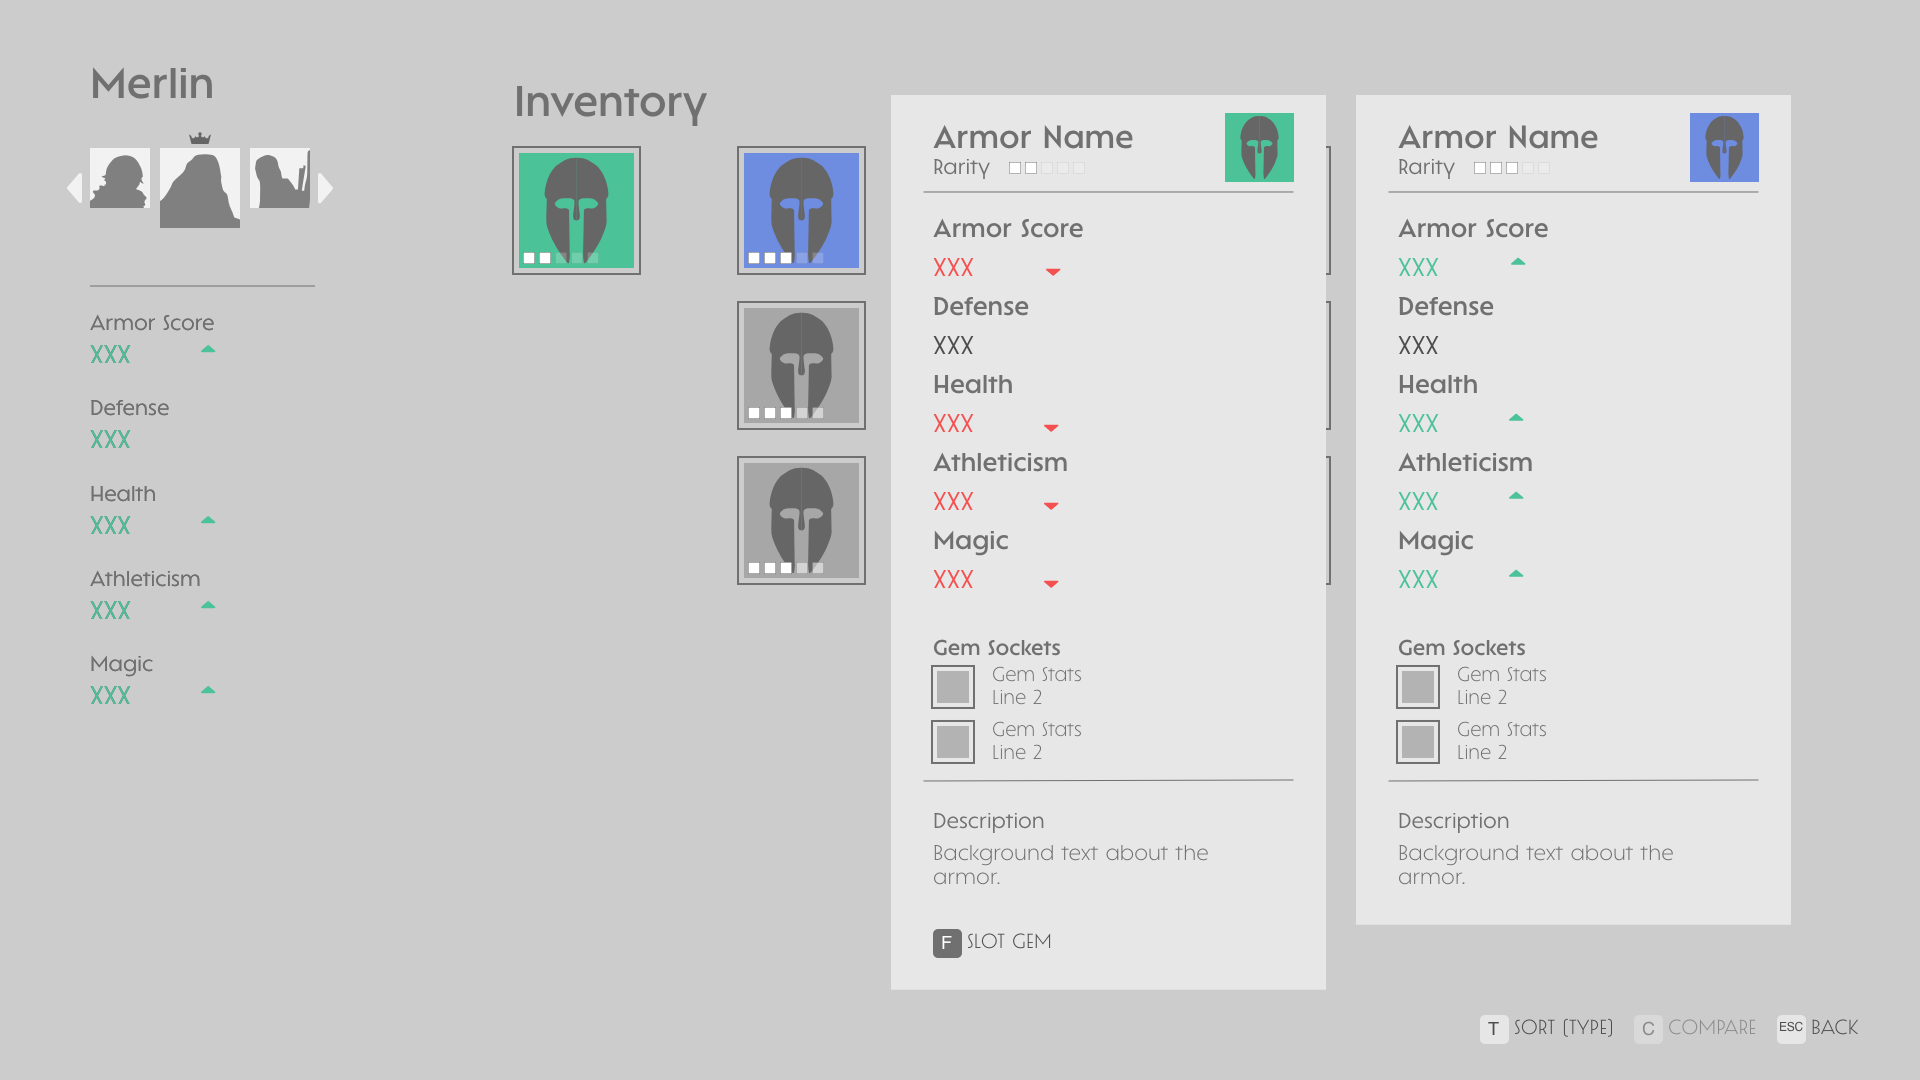 An inventory wireframe comparing two items with each other.